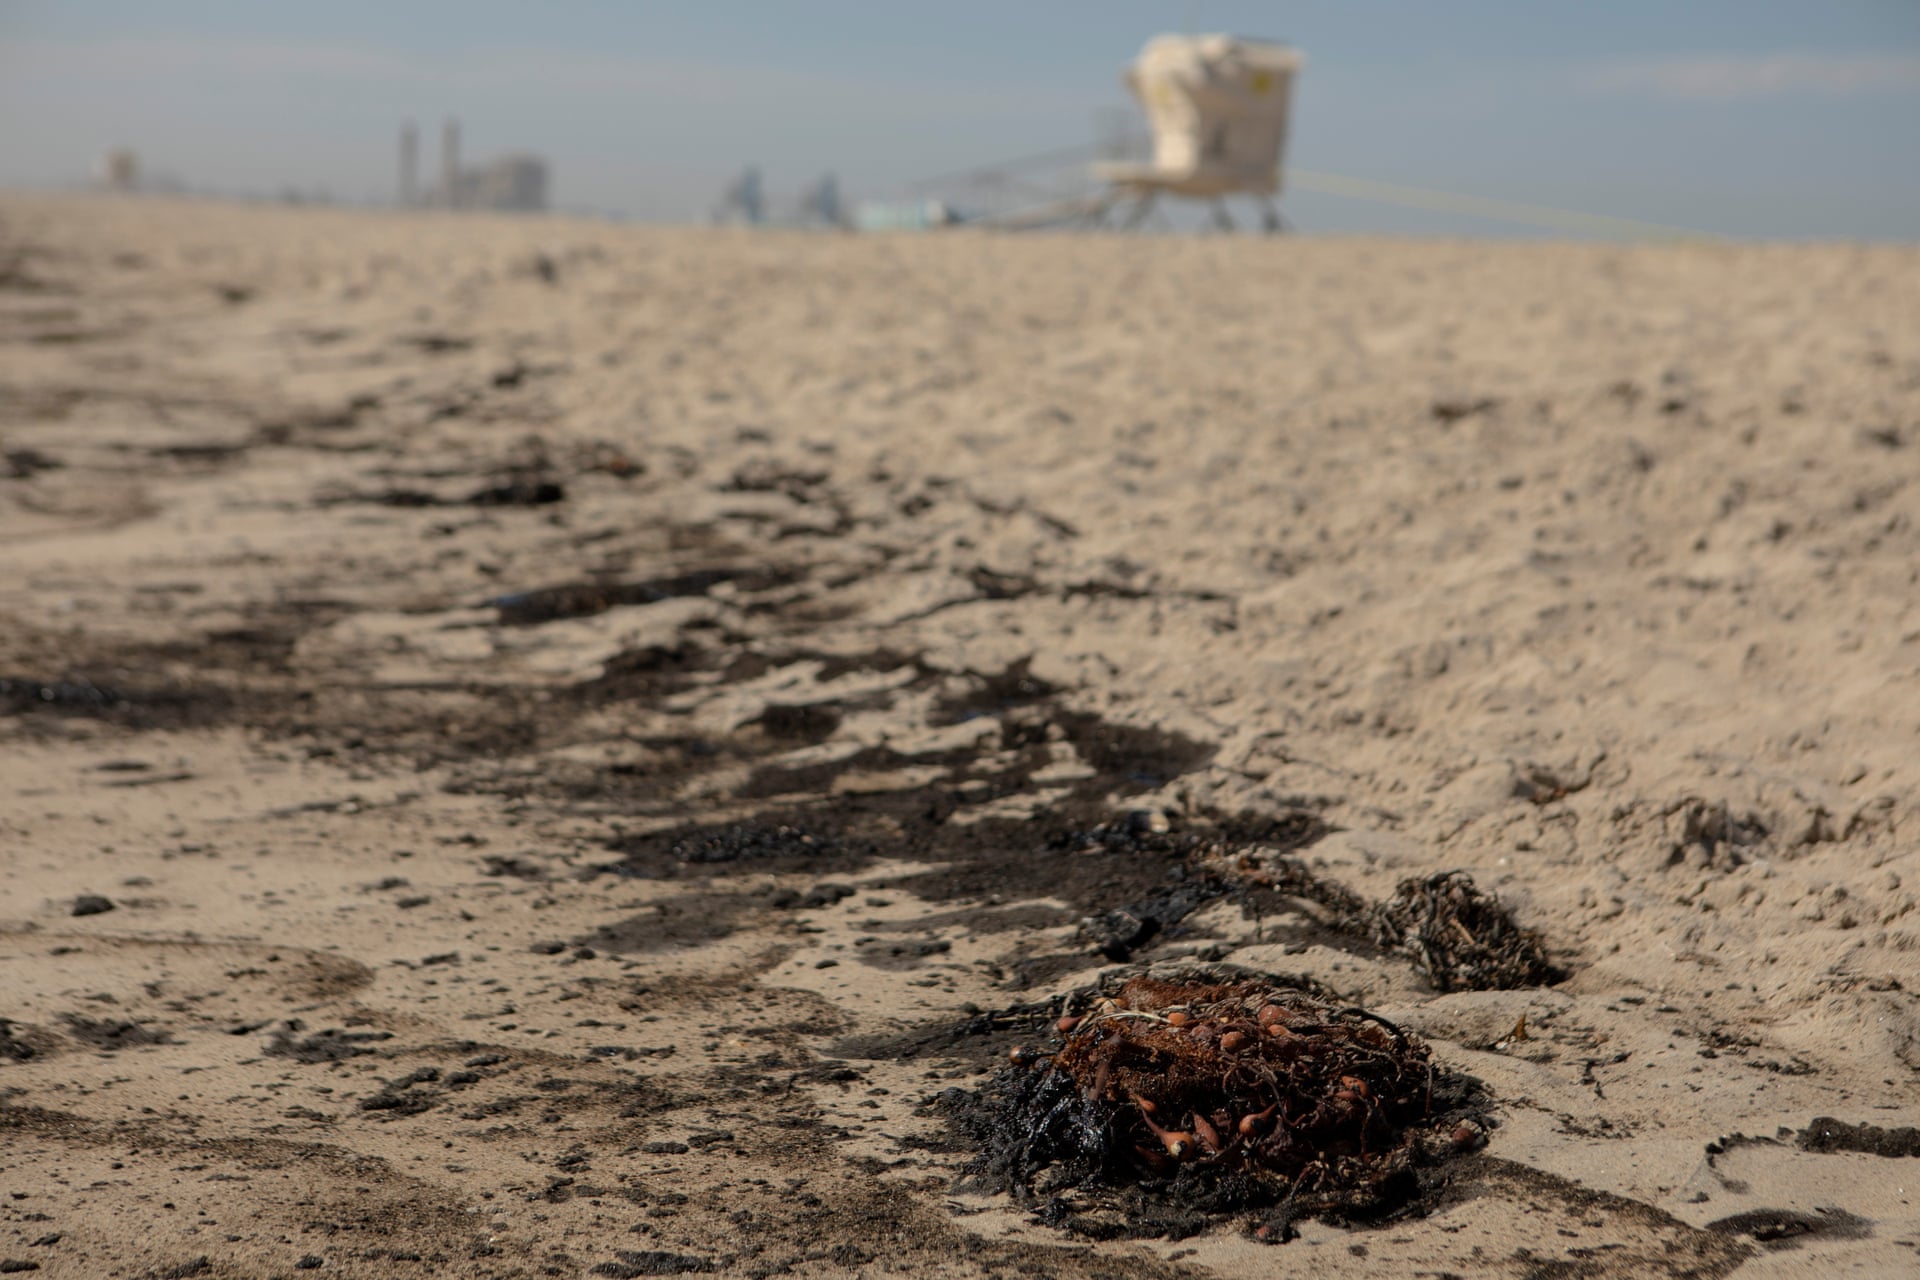 Huntington oil disaster, Gabrielle Canon/The Guardian https://www.theguardian.com/us-news/gallery/2021/oct/04/huntington-beach-oil-spill-pictures